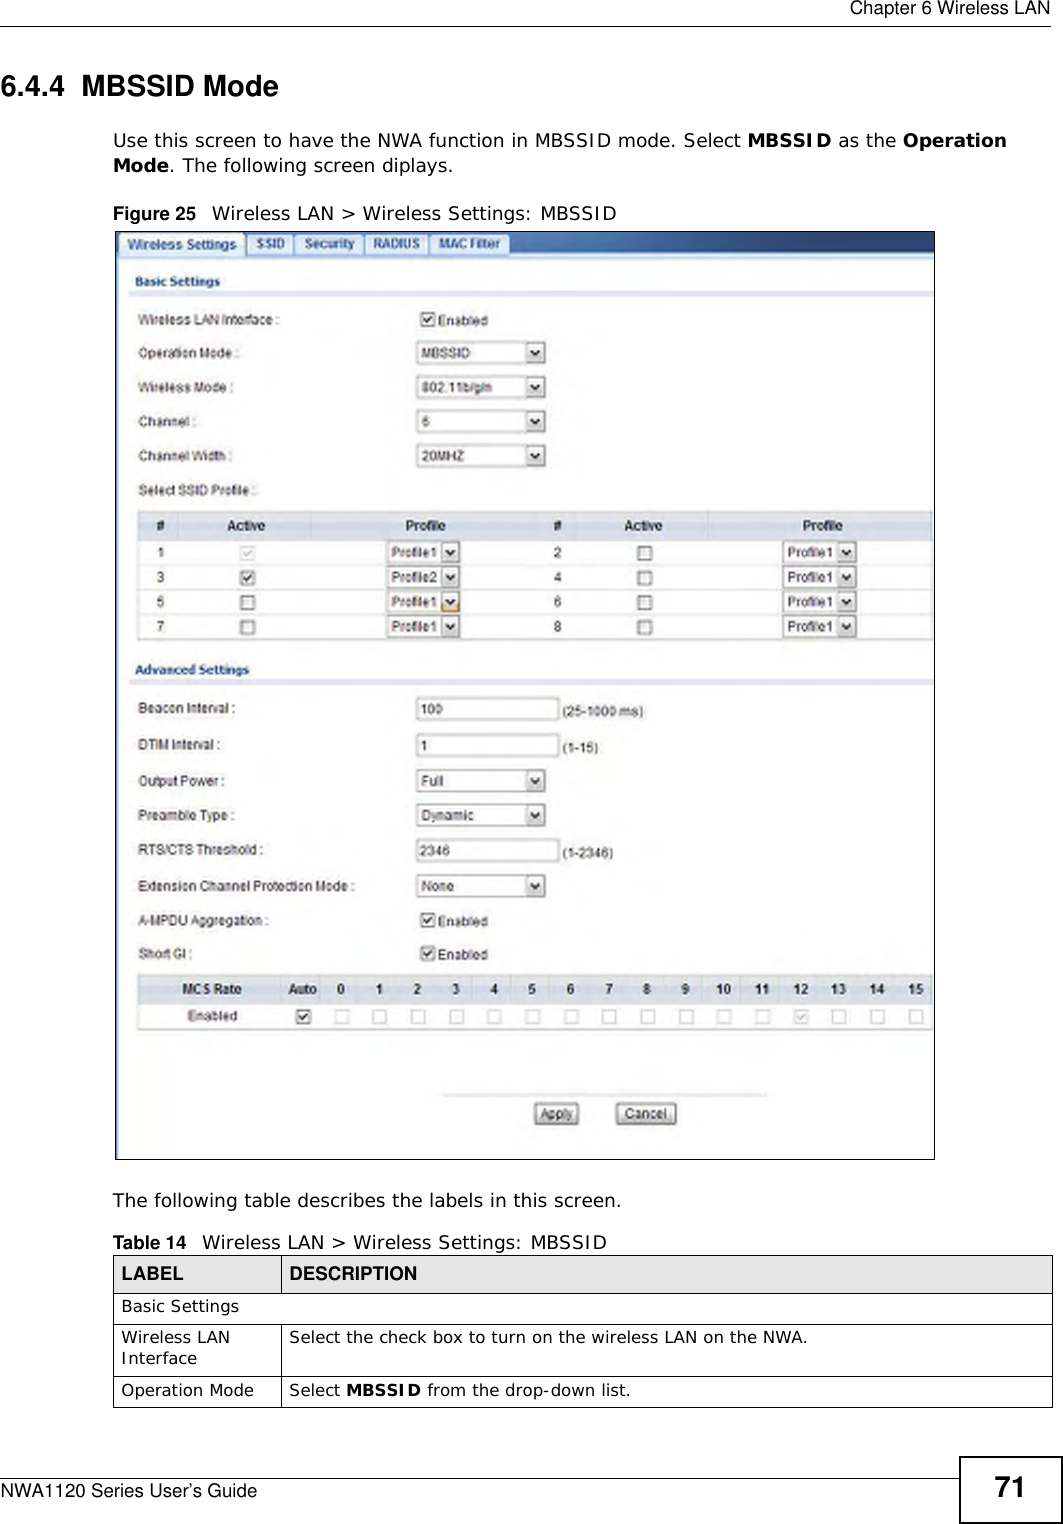  Chapter 6 Wireless LANNWA1120 Series User’s Guide 716.4.4  MBSSID ModeUse this screen to have the NWA function in MBSSID mode. Select MBSSID as the Operation Mode. The following screen diplays.Figure 25   Wireless LAN &gt; Wireless Settings: MBSSIDThe following table describes the labels in this screen. Table 14   Wireless LAN &gt; Wireless Settings: MBSSIDLABEL DESCRIPTIONBasic SettingsWireless LAN Interface Select the check box to turn on the wireless LAN on the NWA.Operation Mode Select MBSSID from the drop-down list. 